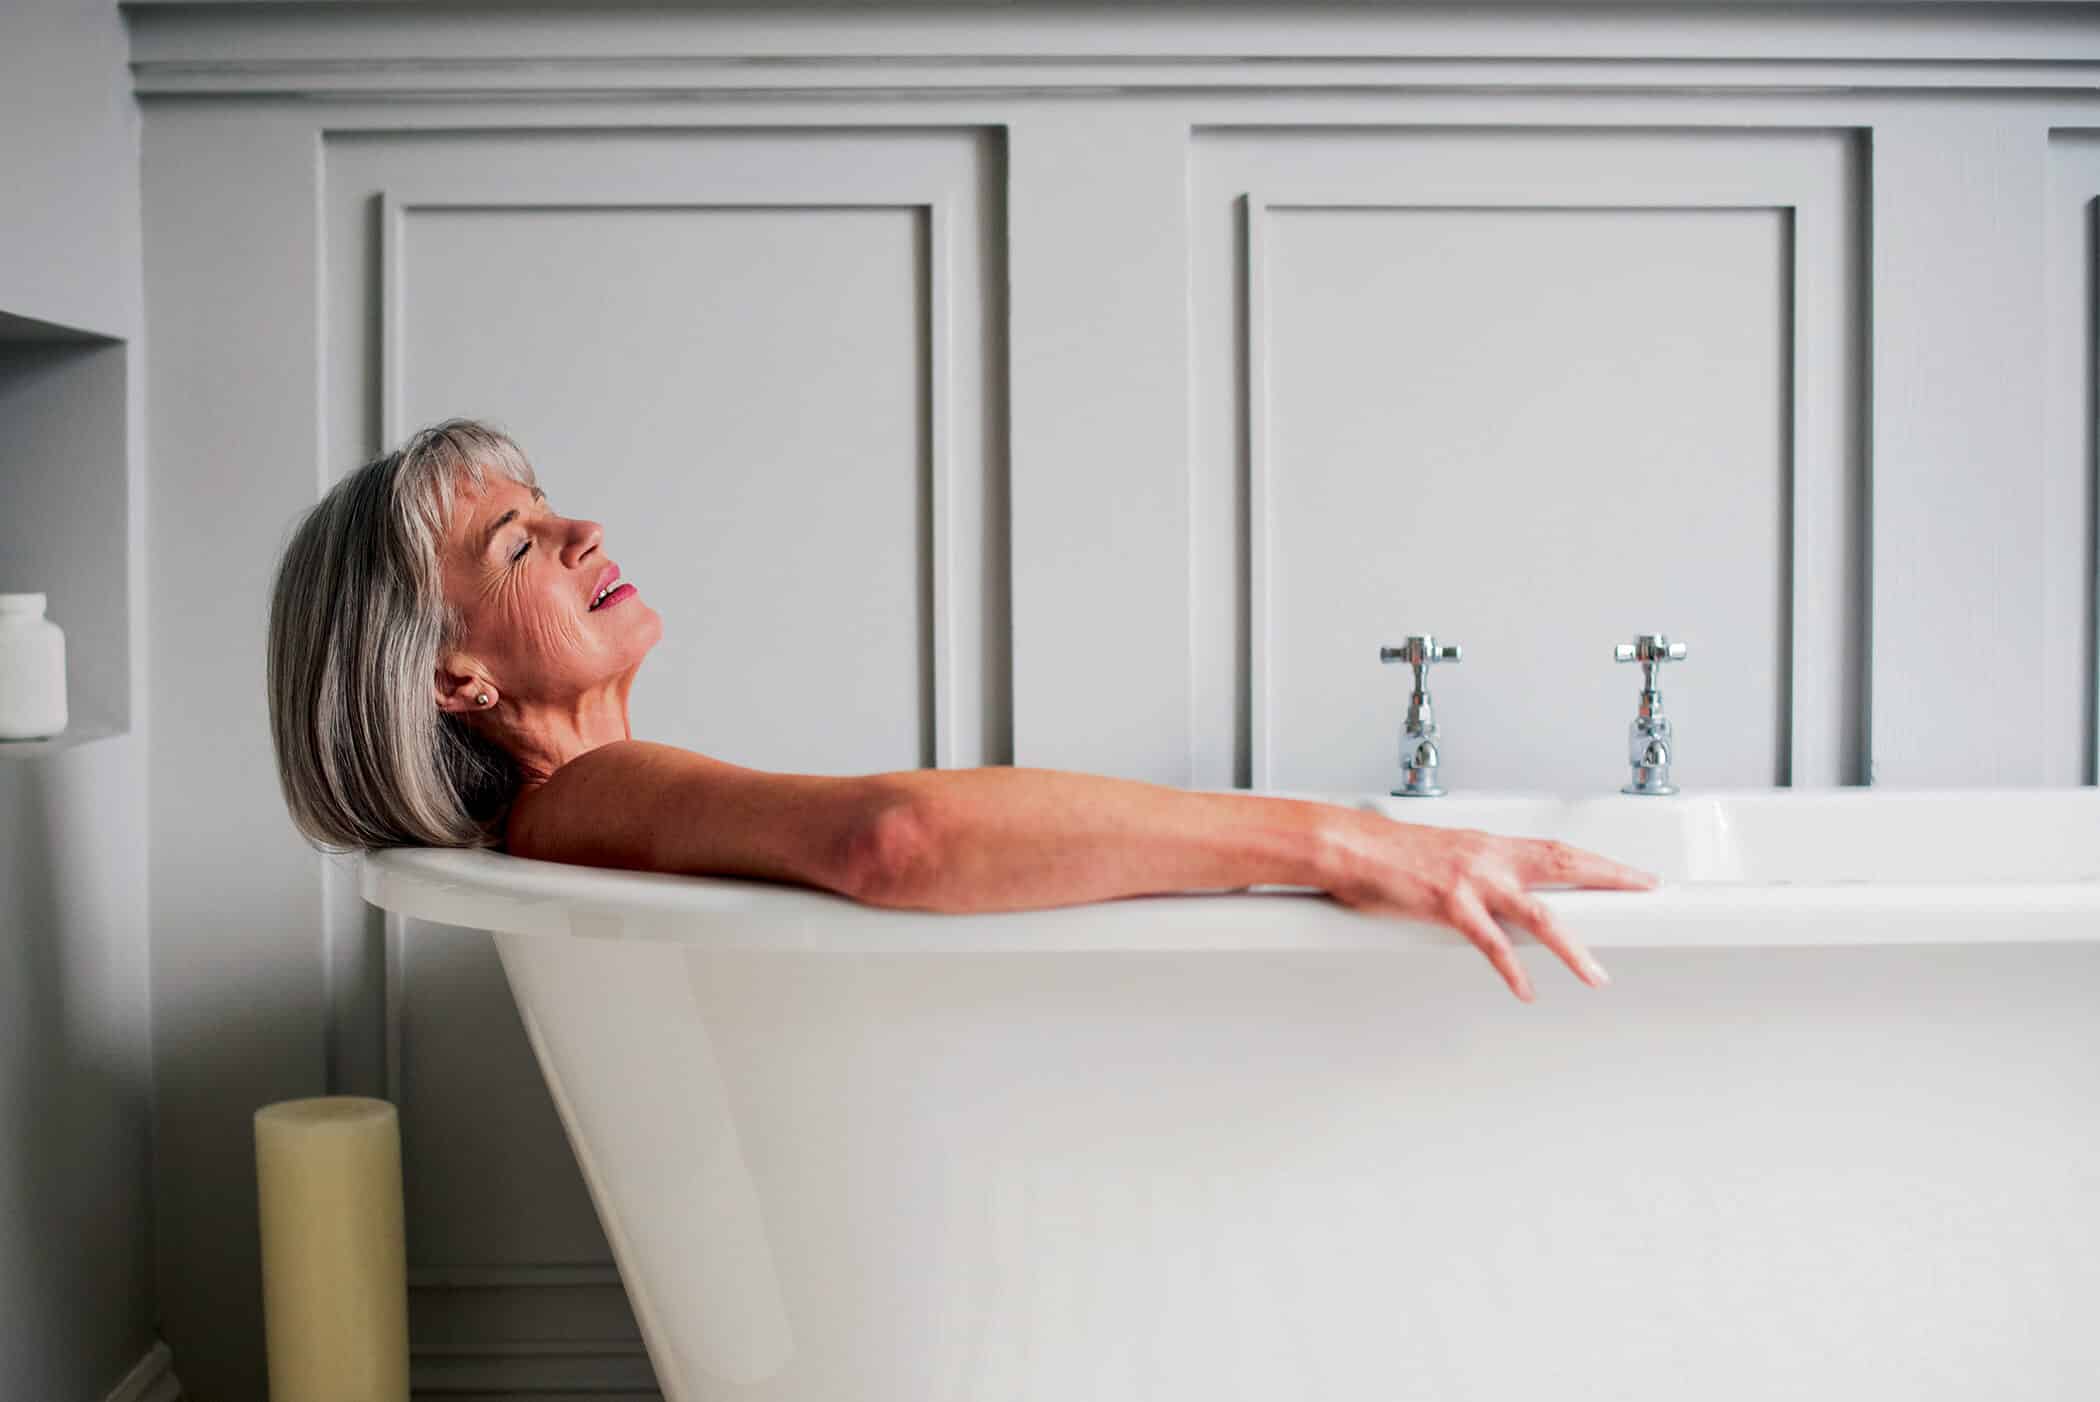 The Onsena Spa Bath can be used in conjunction with existing physiotherapy protocols